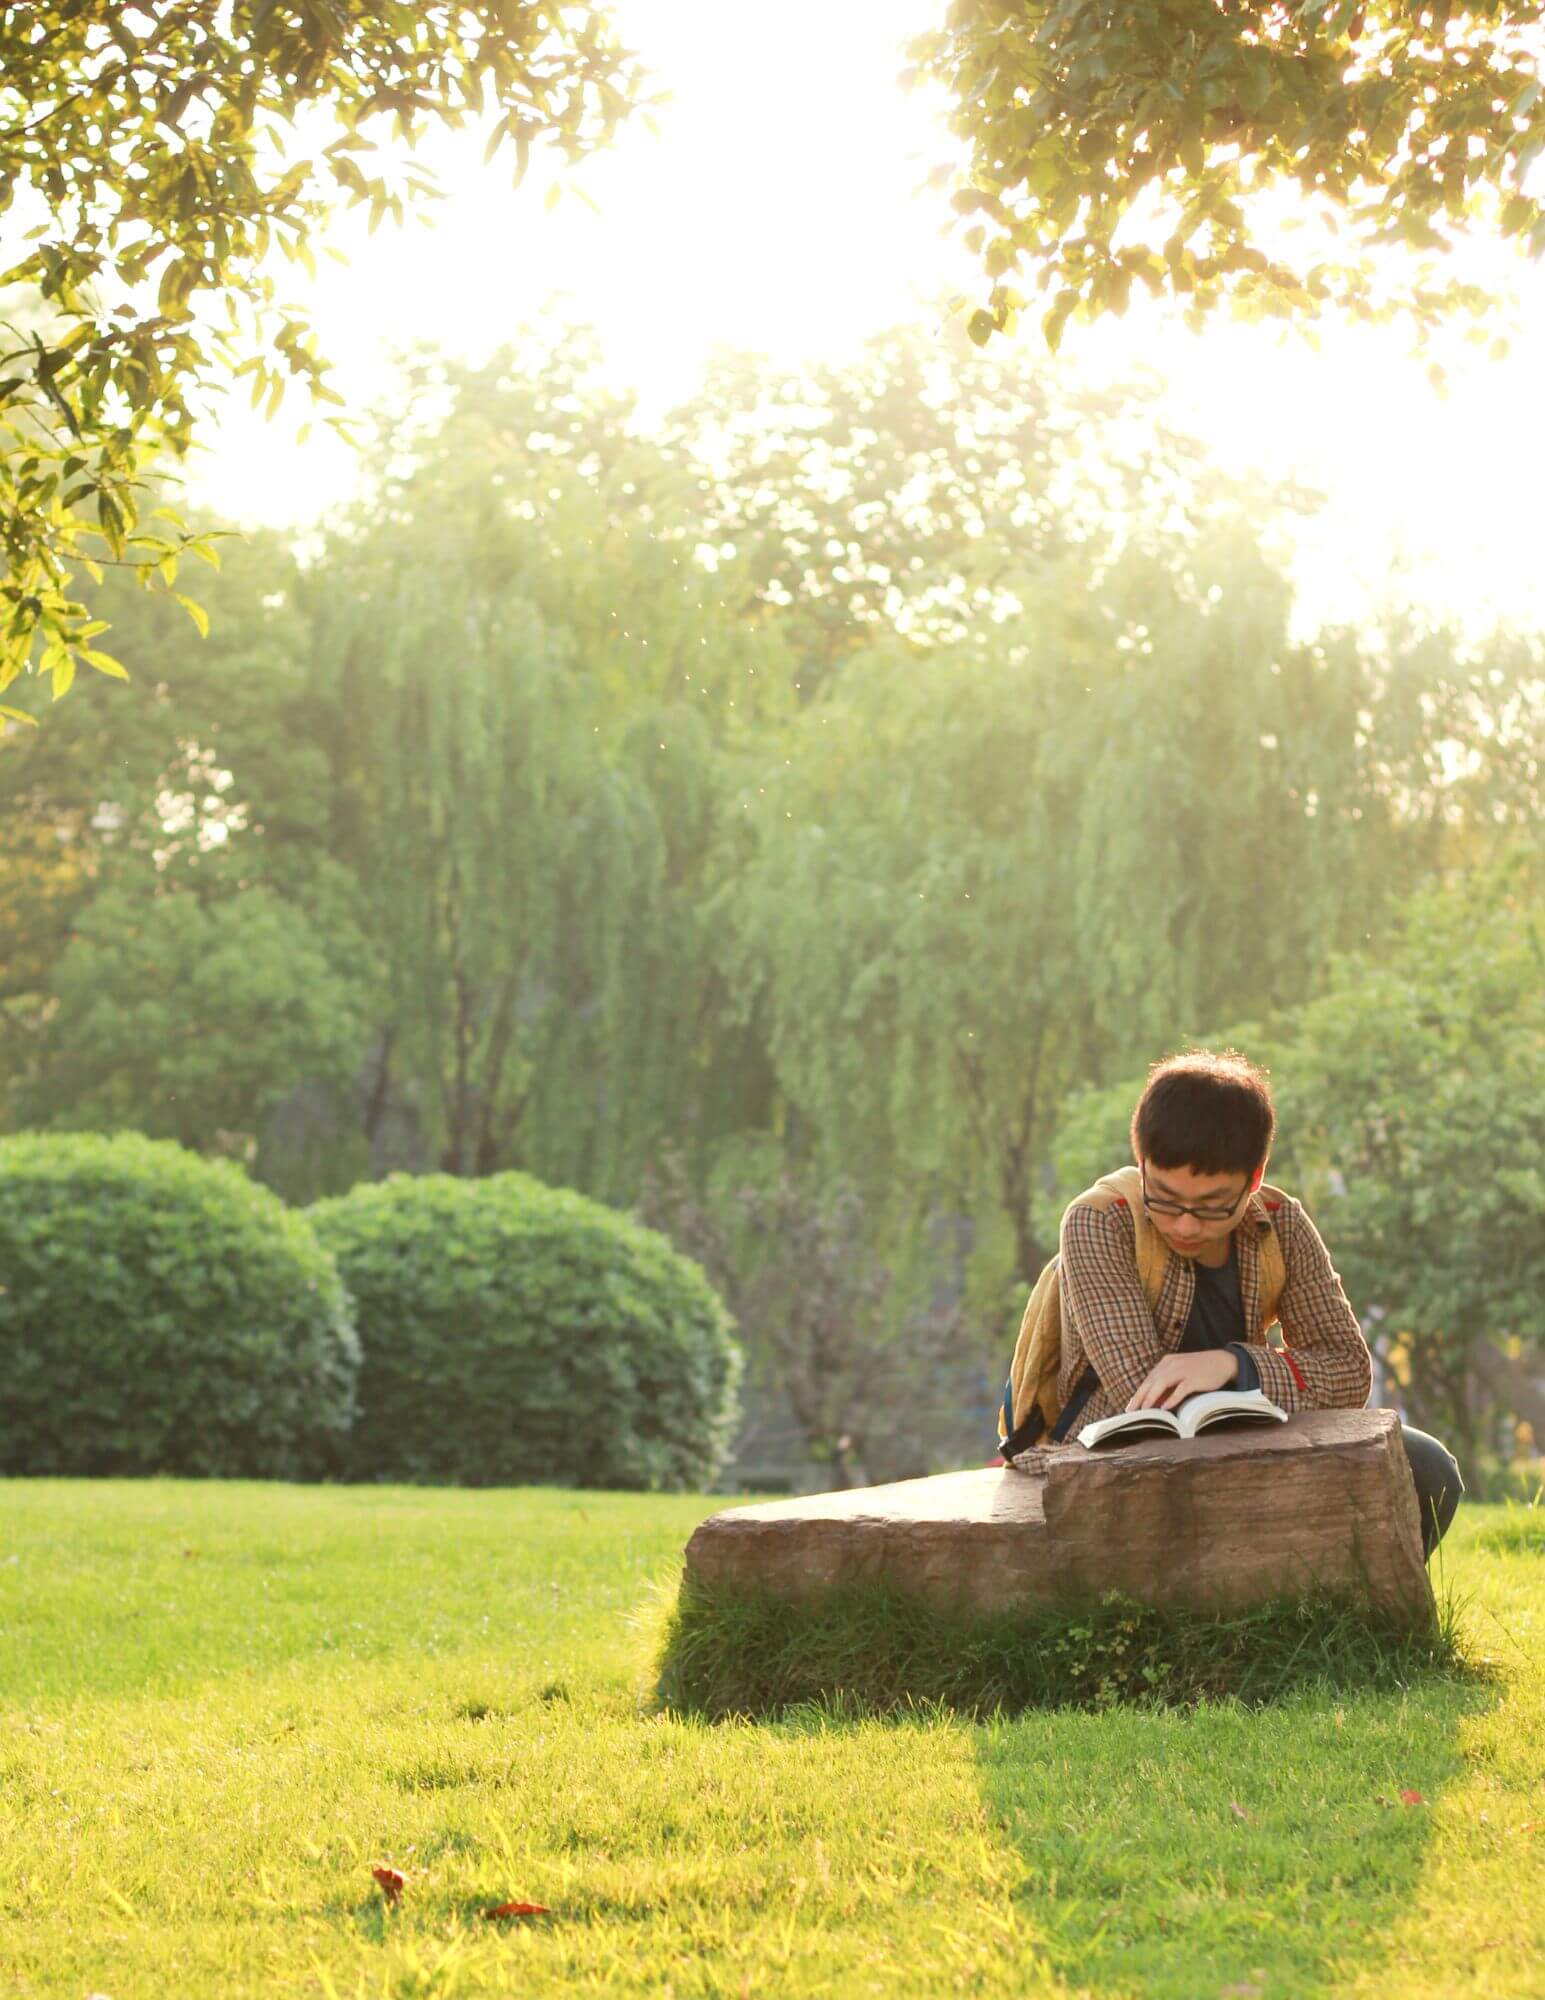 A man sitting outdoors reading a book